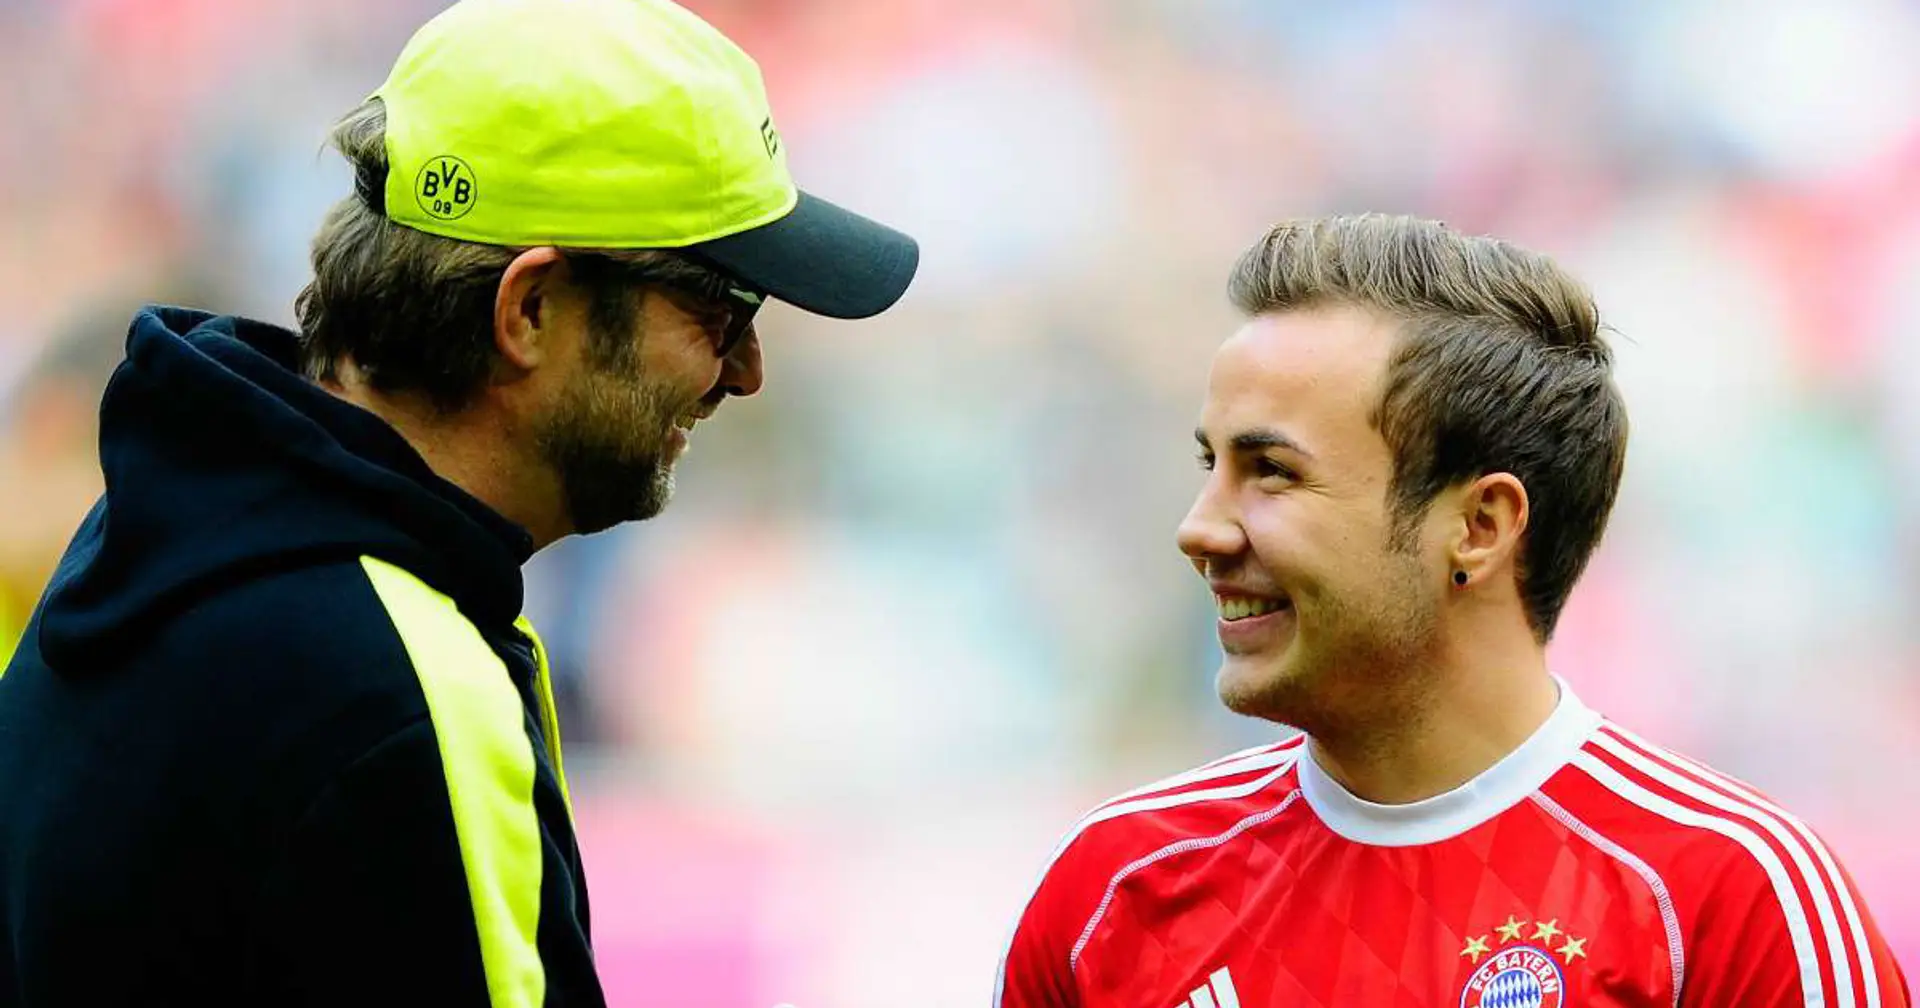 Revealed: Why Mario Gotze's move to Liverpool did not go through